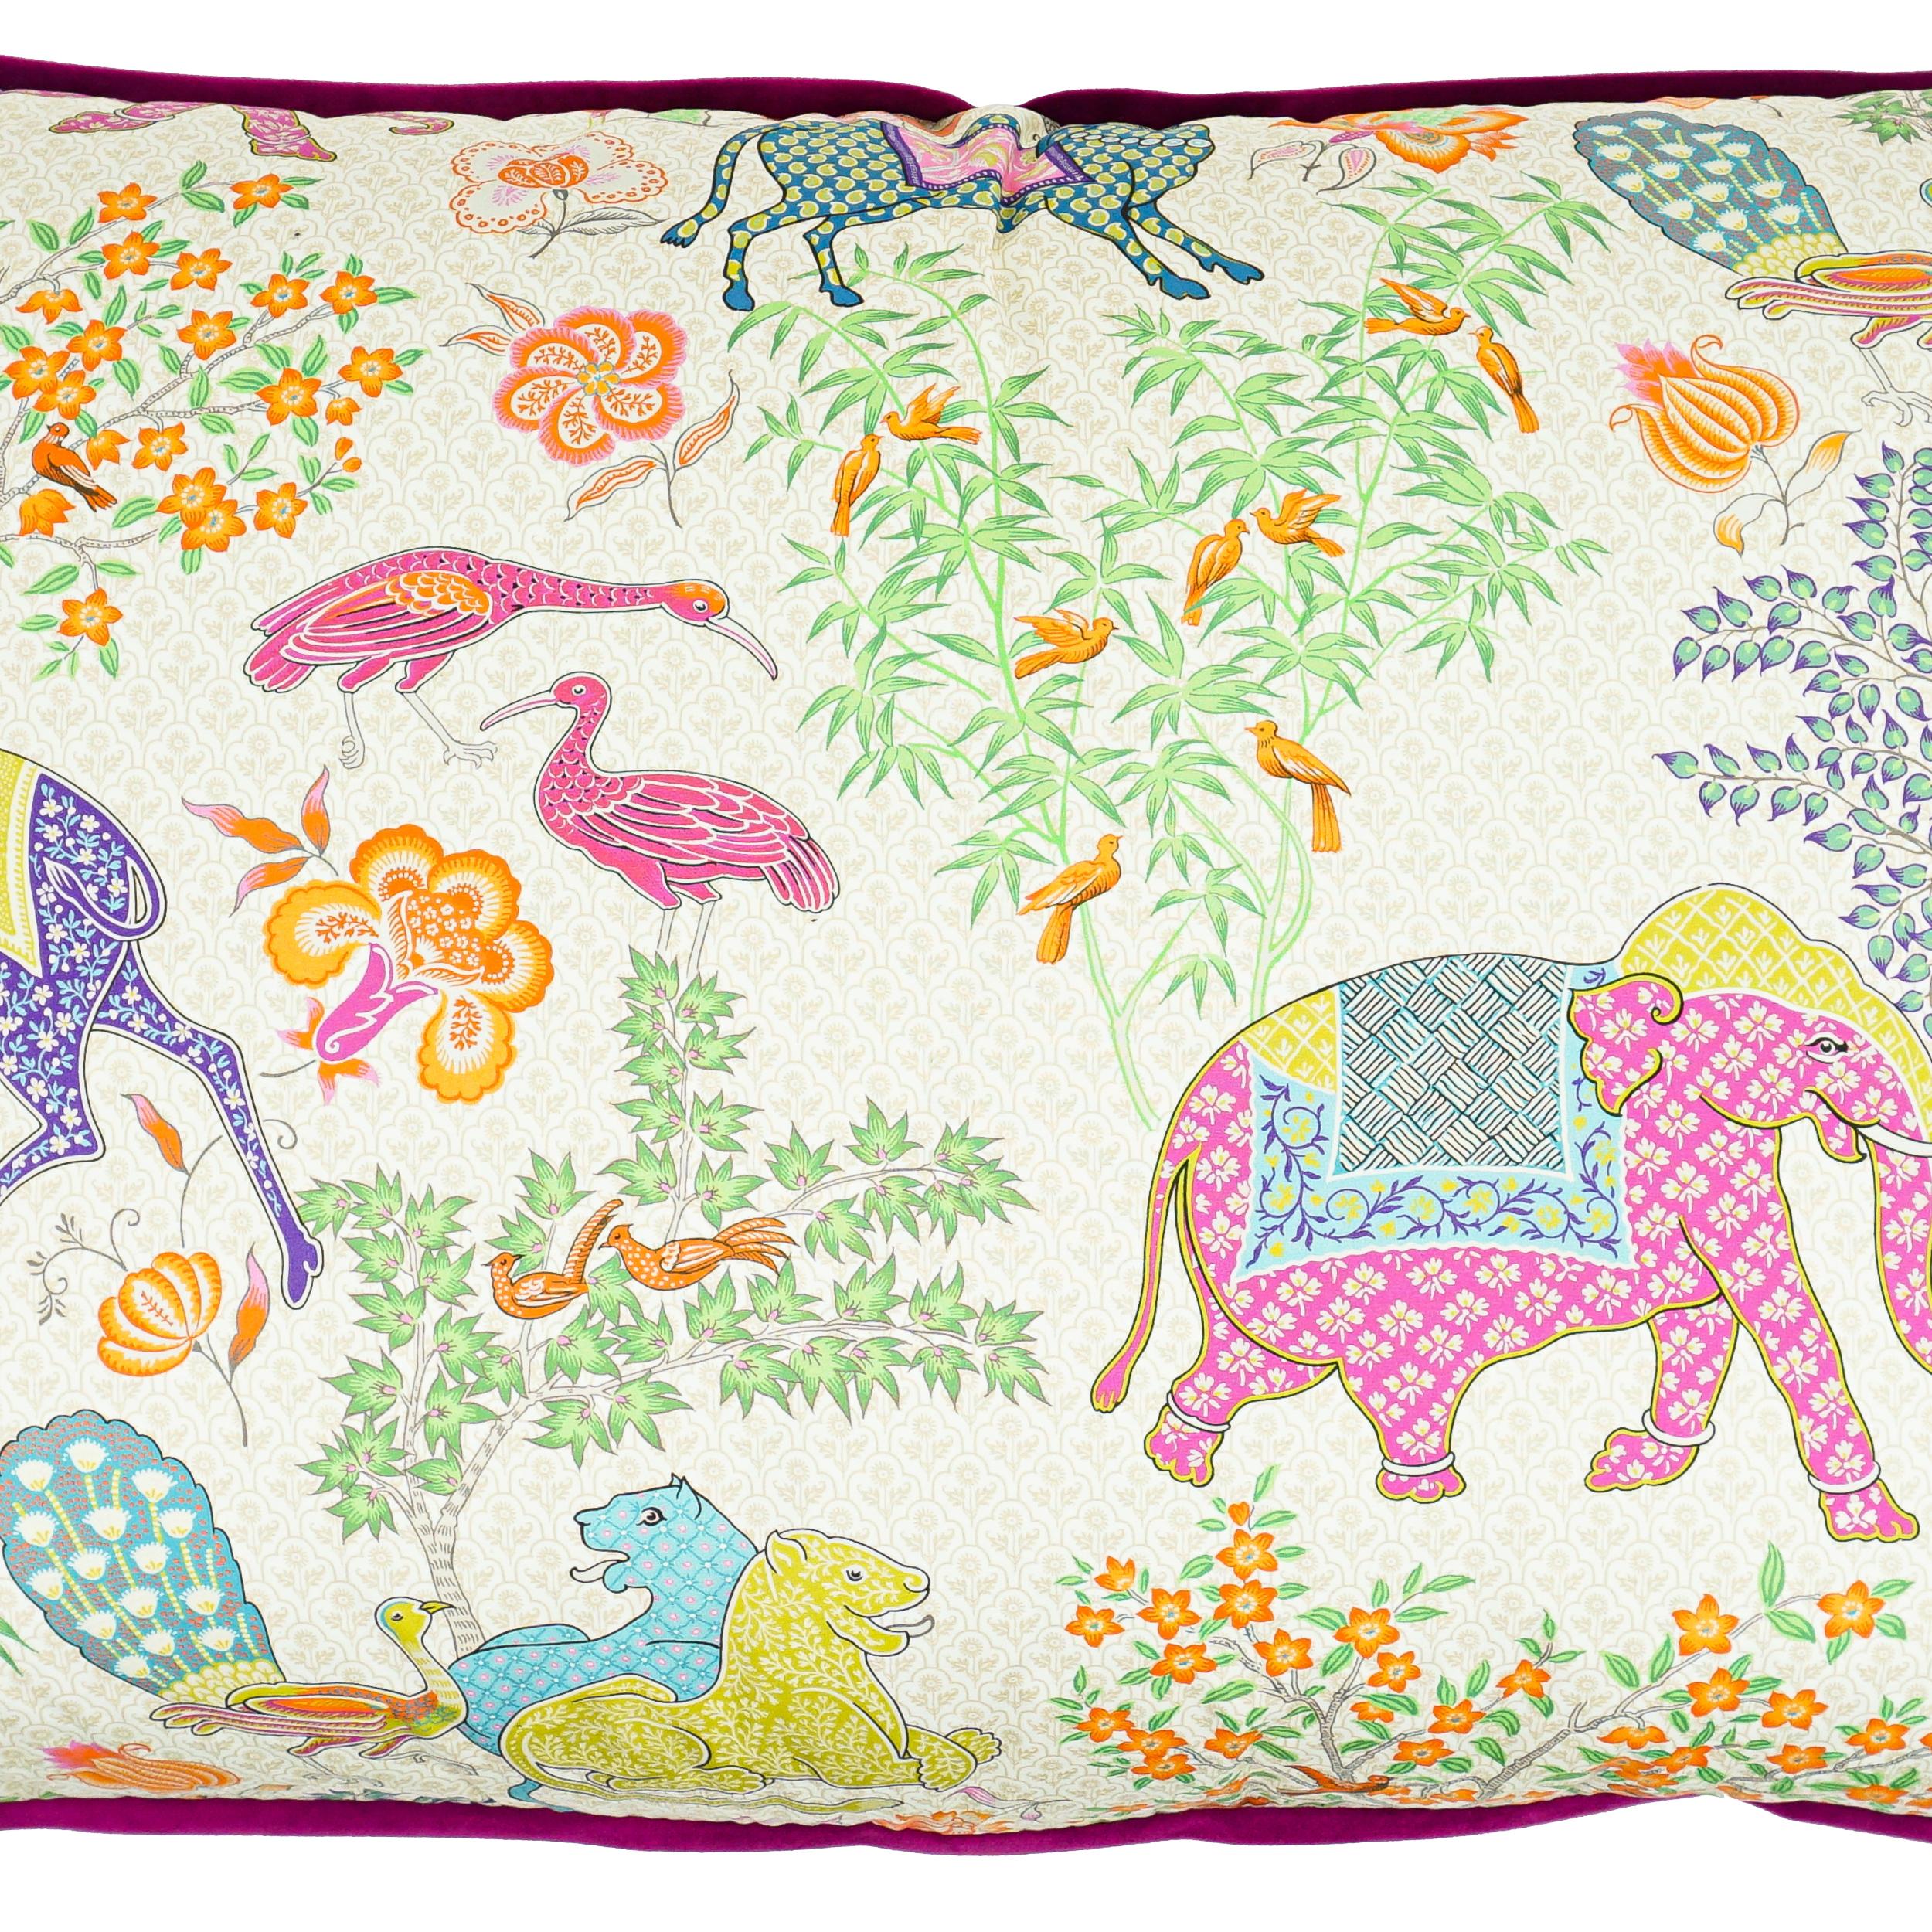 Exotic Playful Oversized Pillow with Elephant Camel Printed Cotton & Pink Velvet For Sale 5